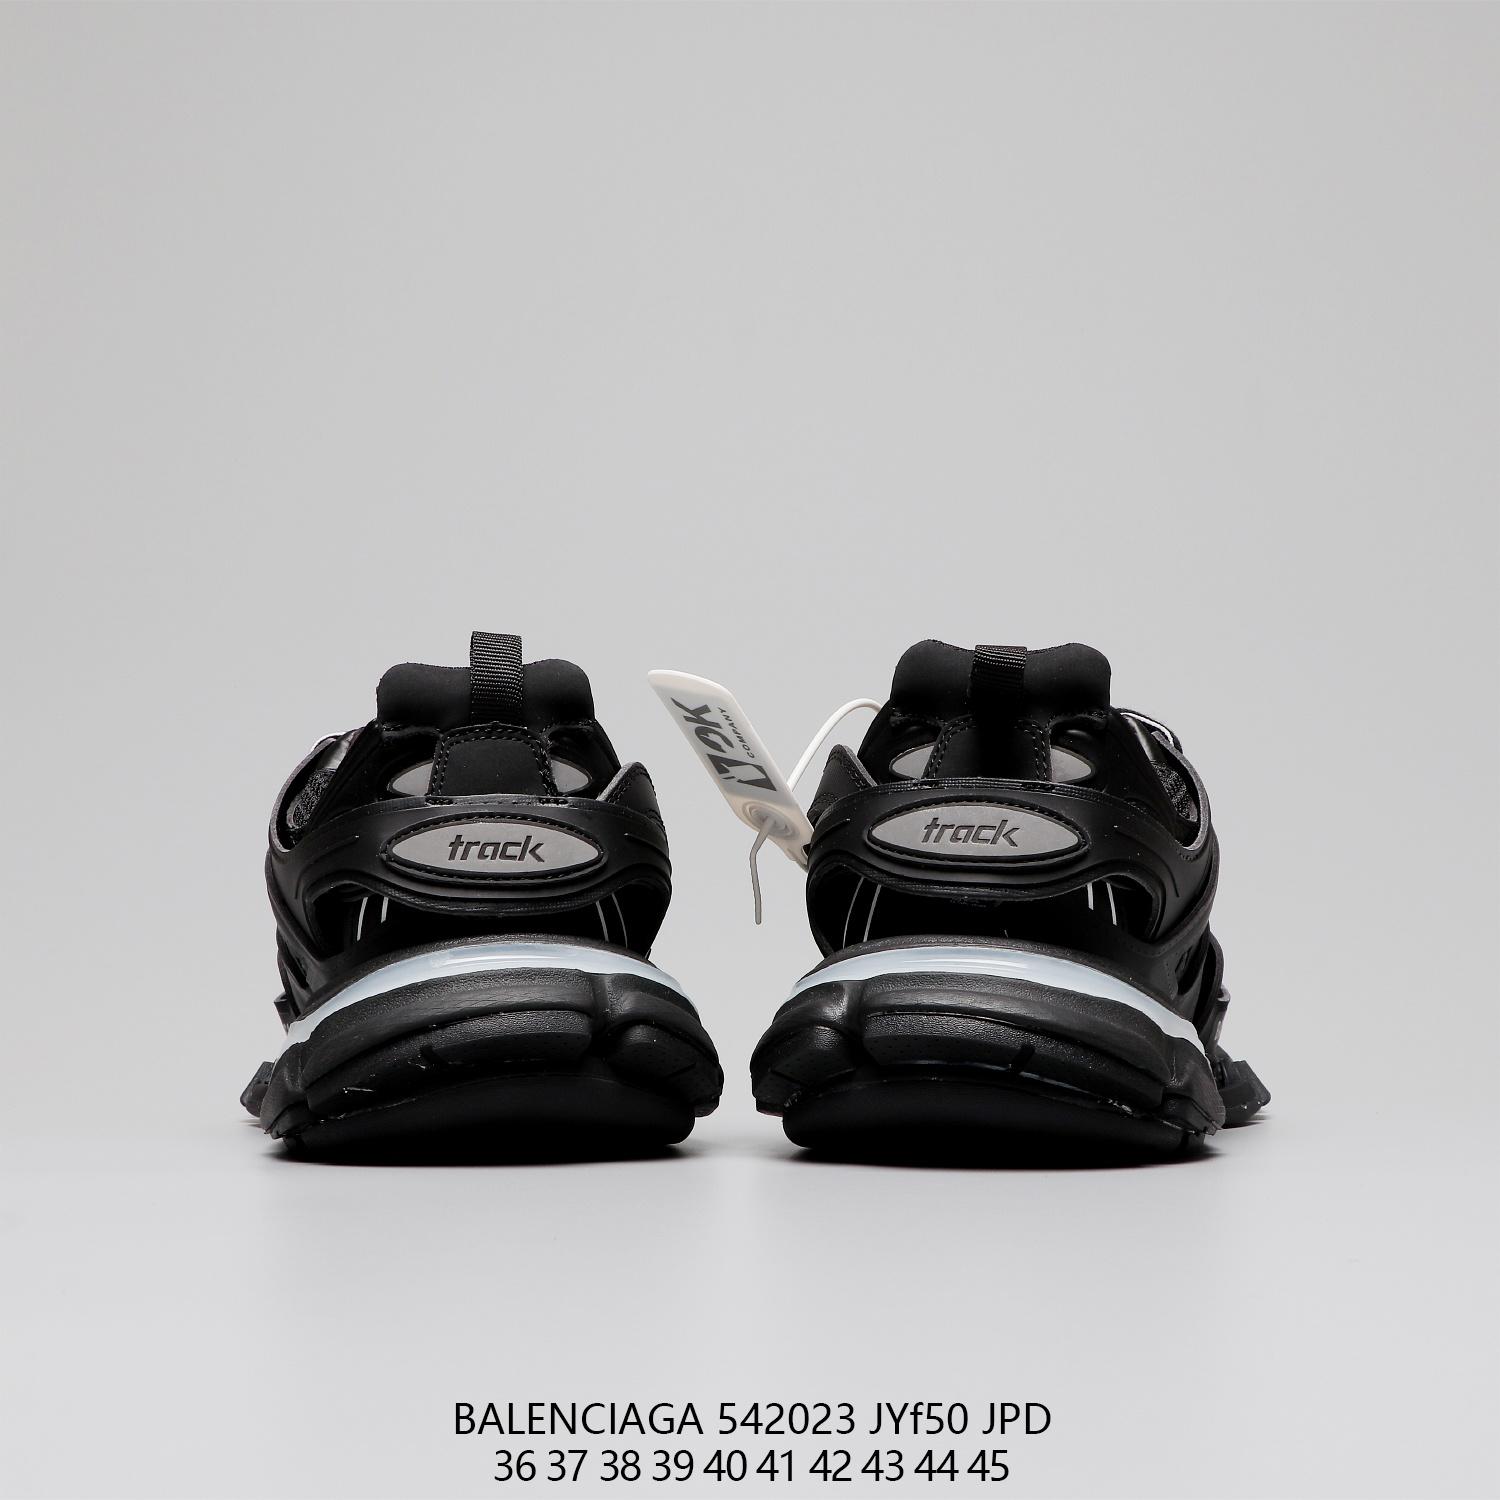 Balenciaga Track Trainers For Sale Jordans For All